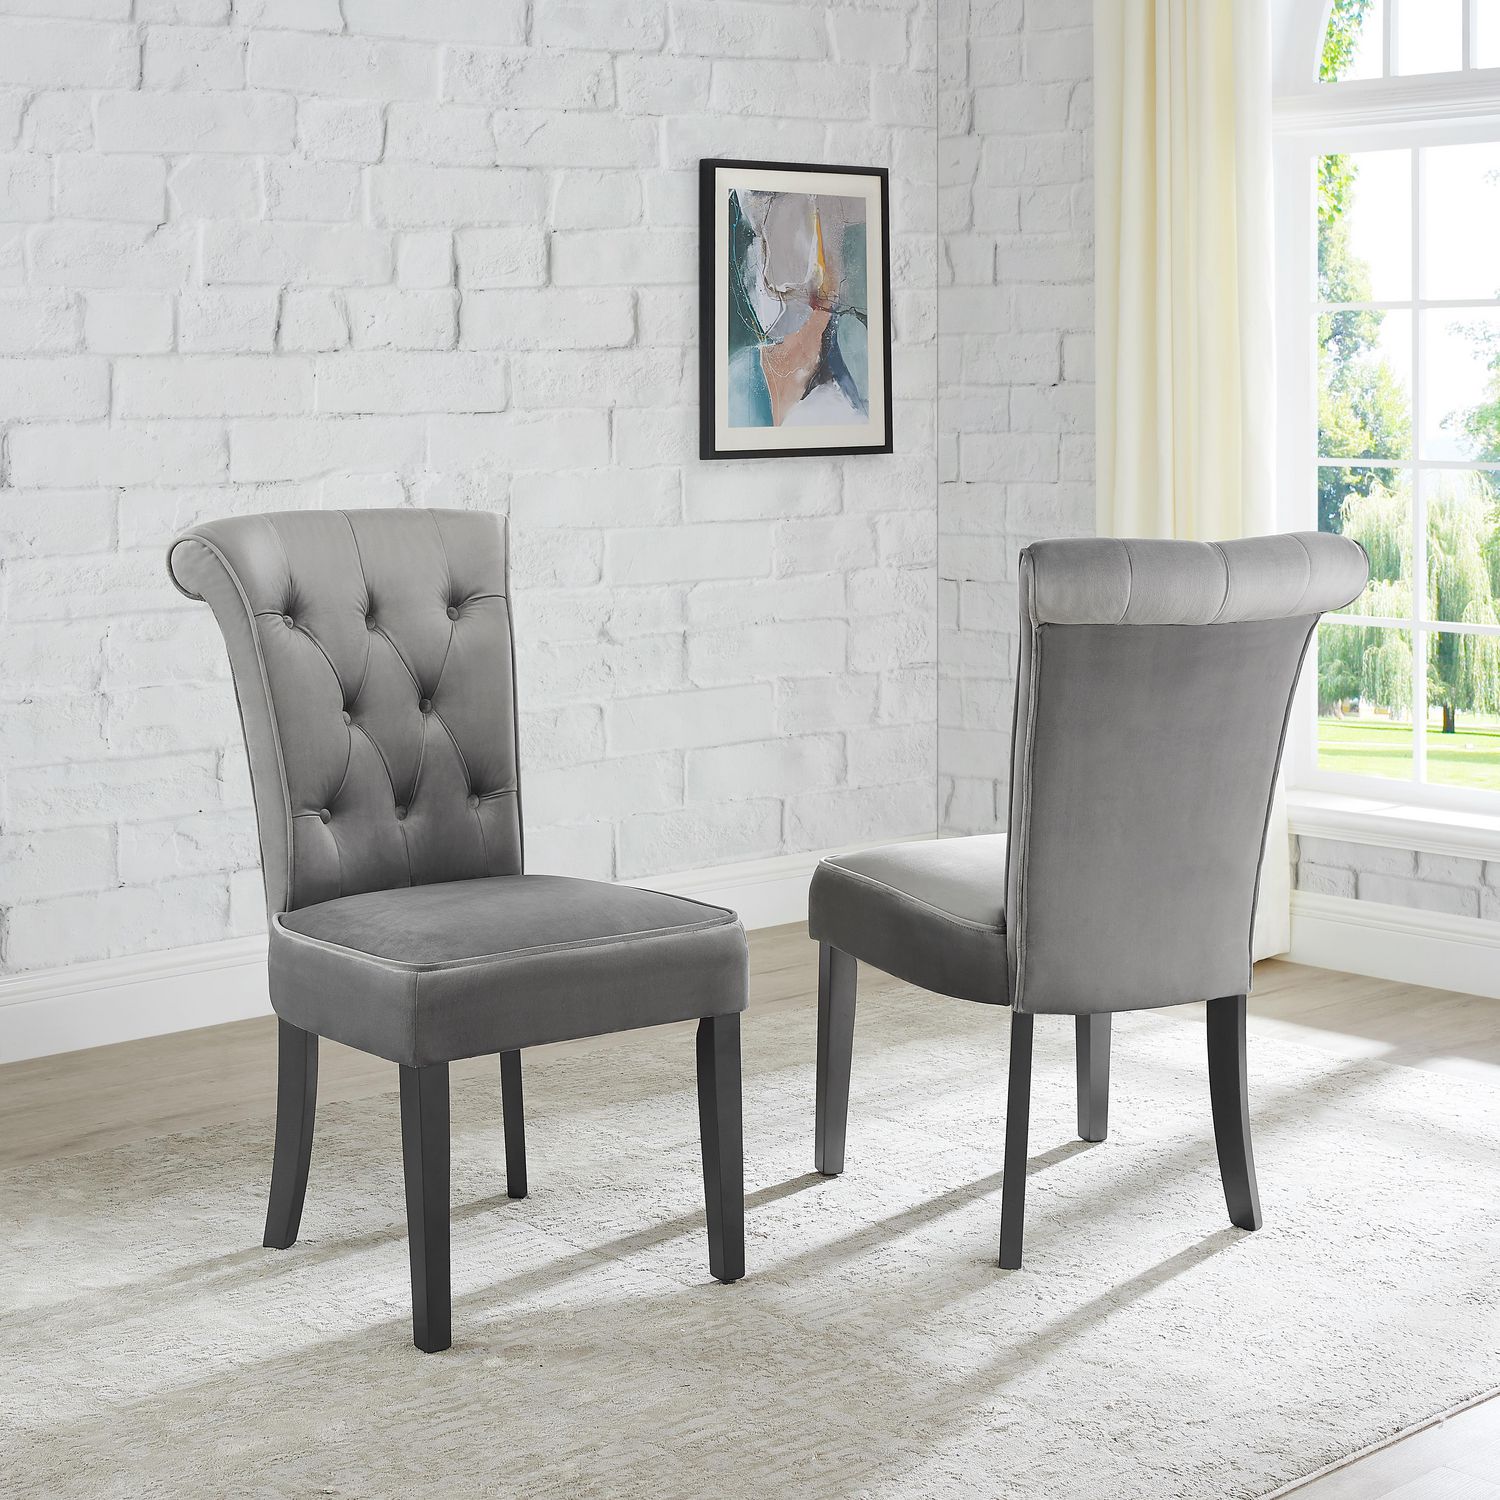 Ava Tufted Dining Chair, Set of 2, Grey | Walmart Canada